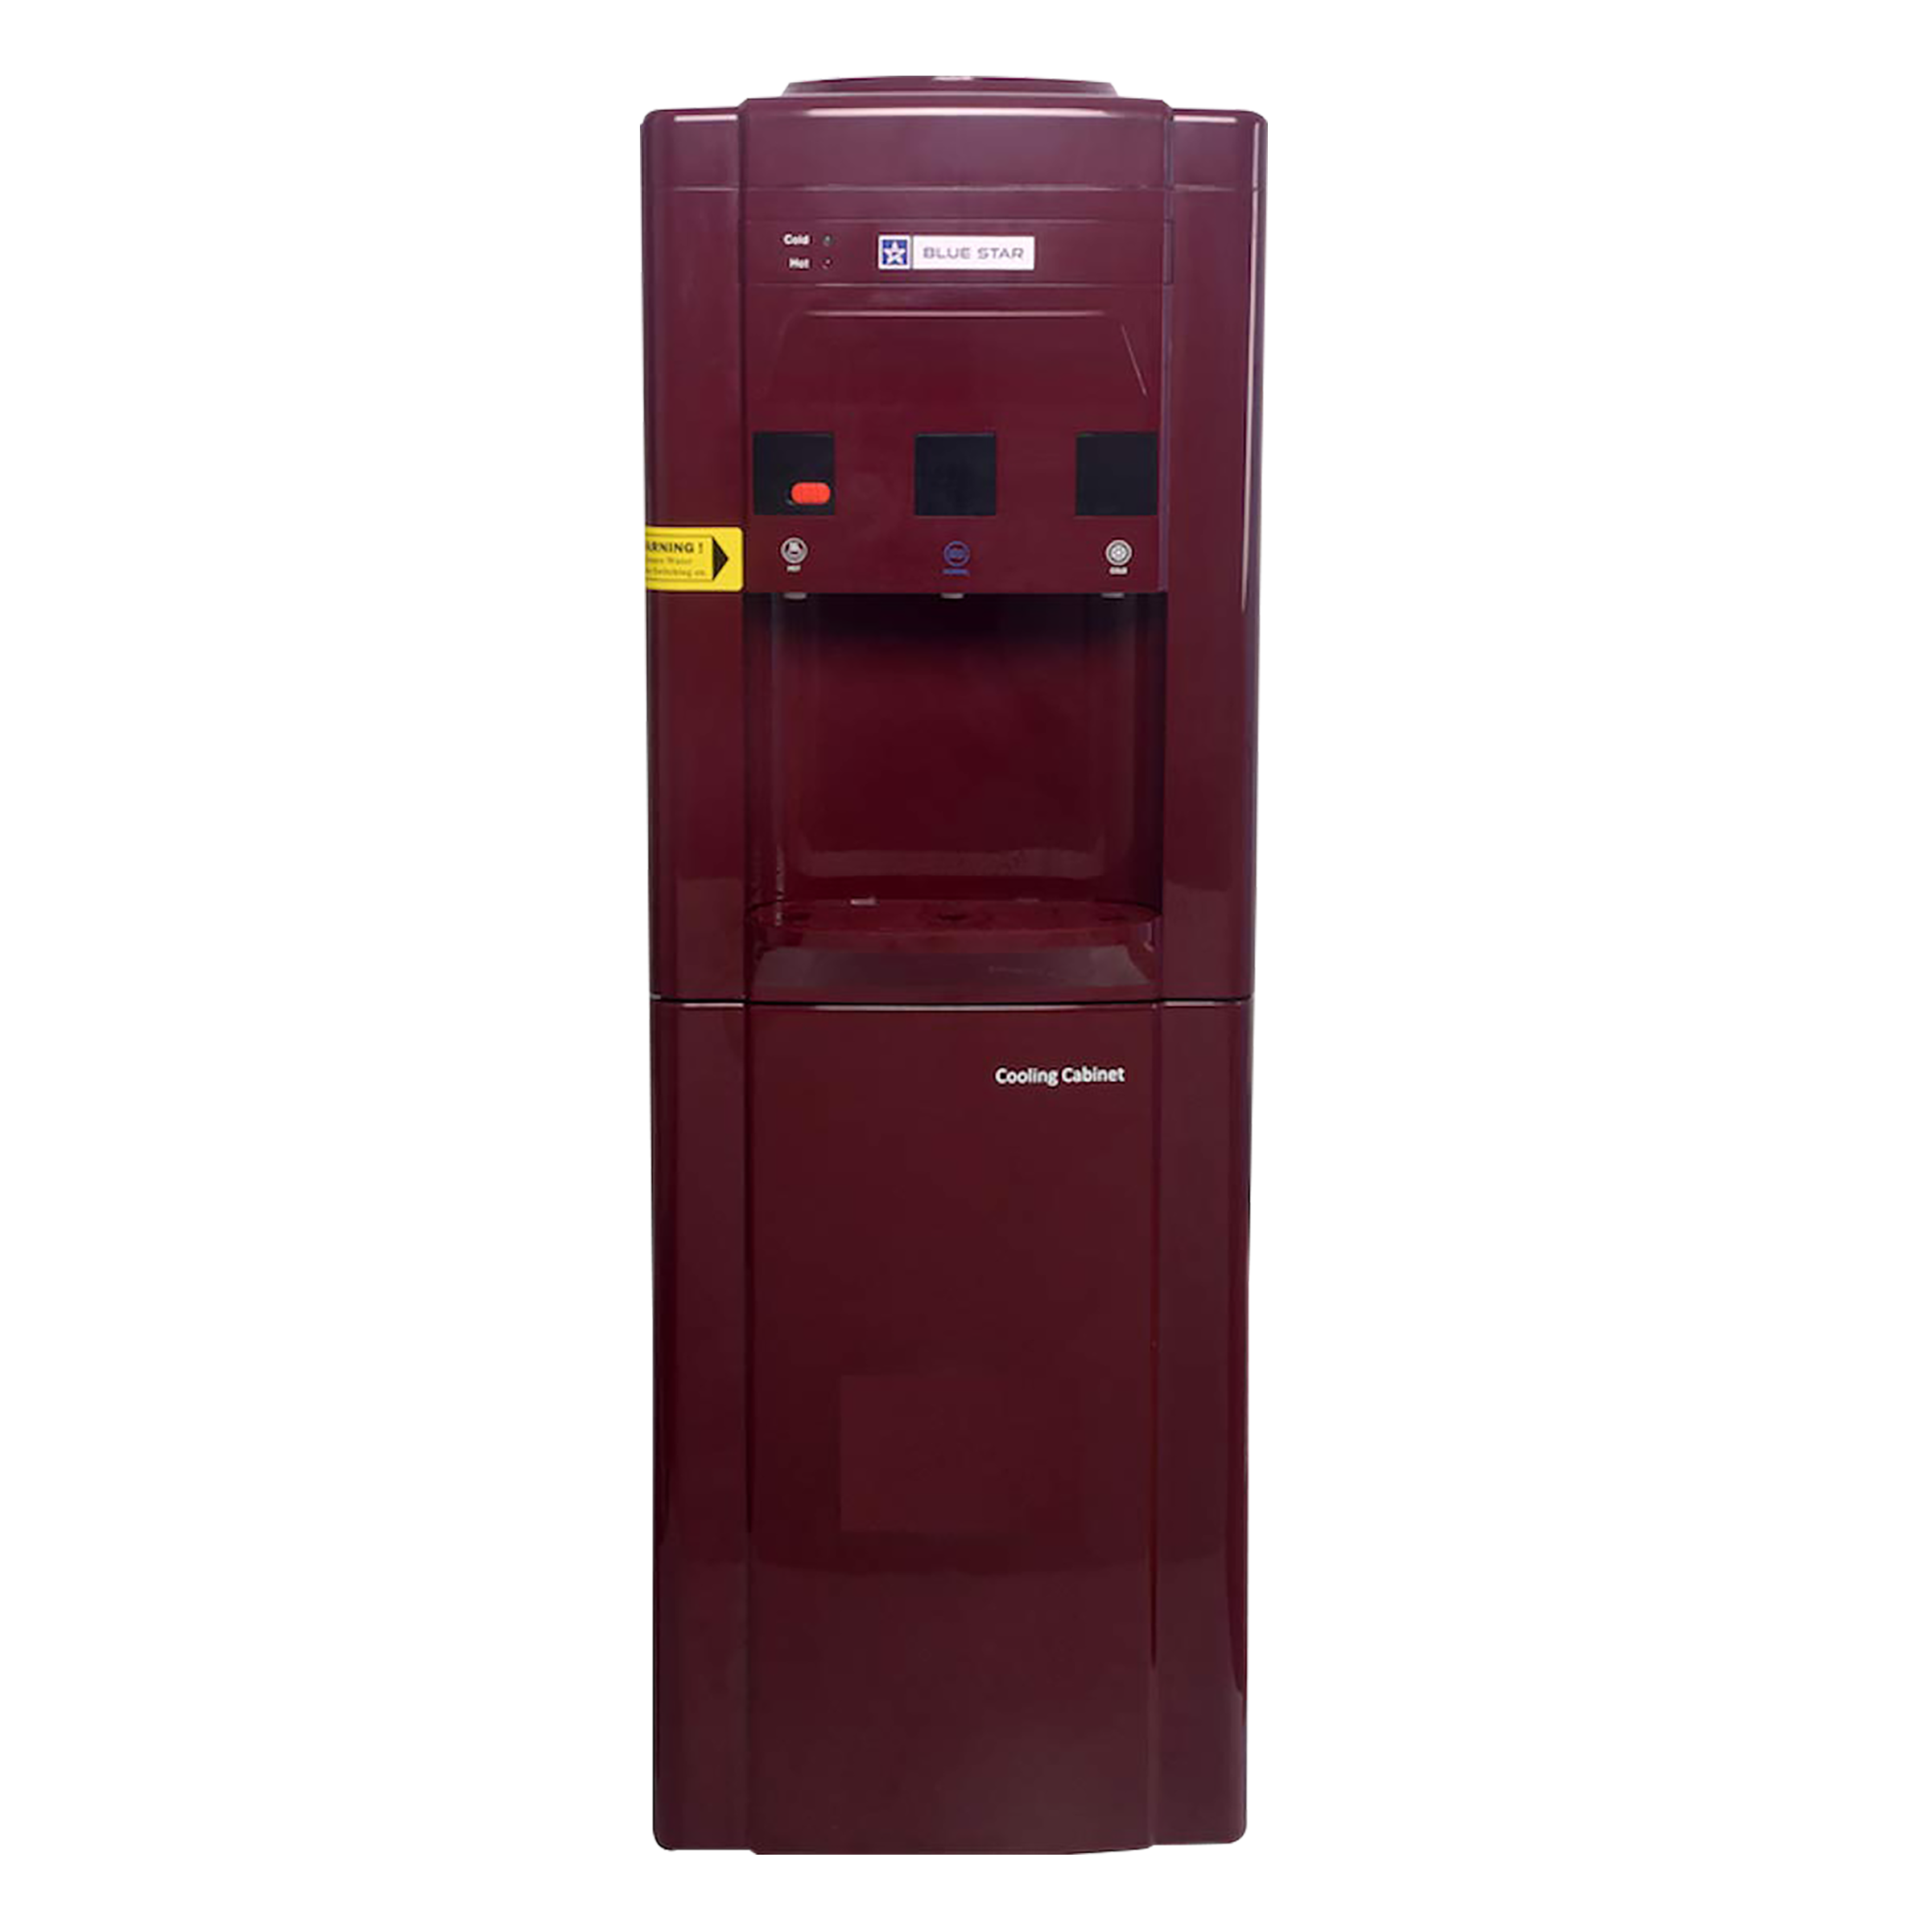 Blue Star Hot, Cold and Normal Top Load Water Dispenser with Cooling Cabinet (Maroon)